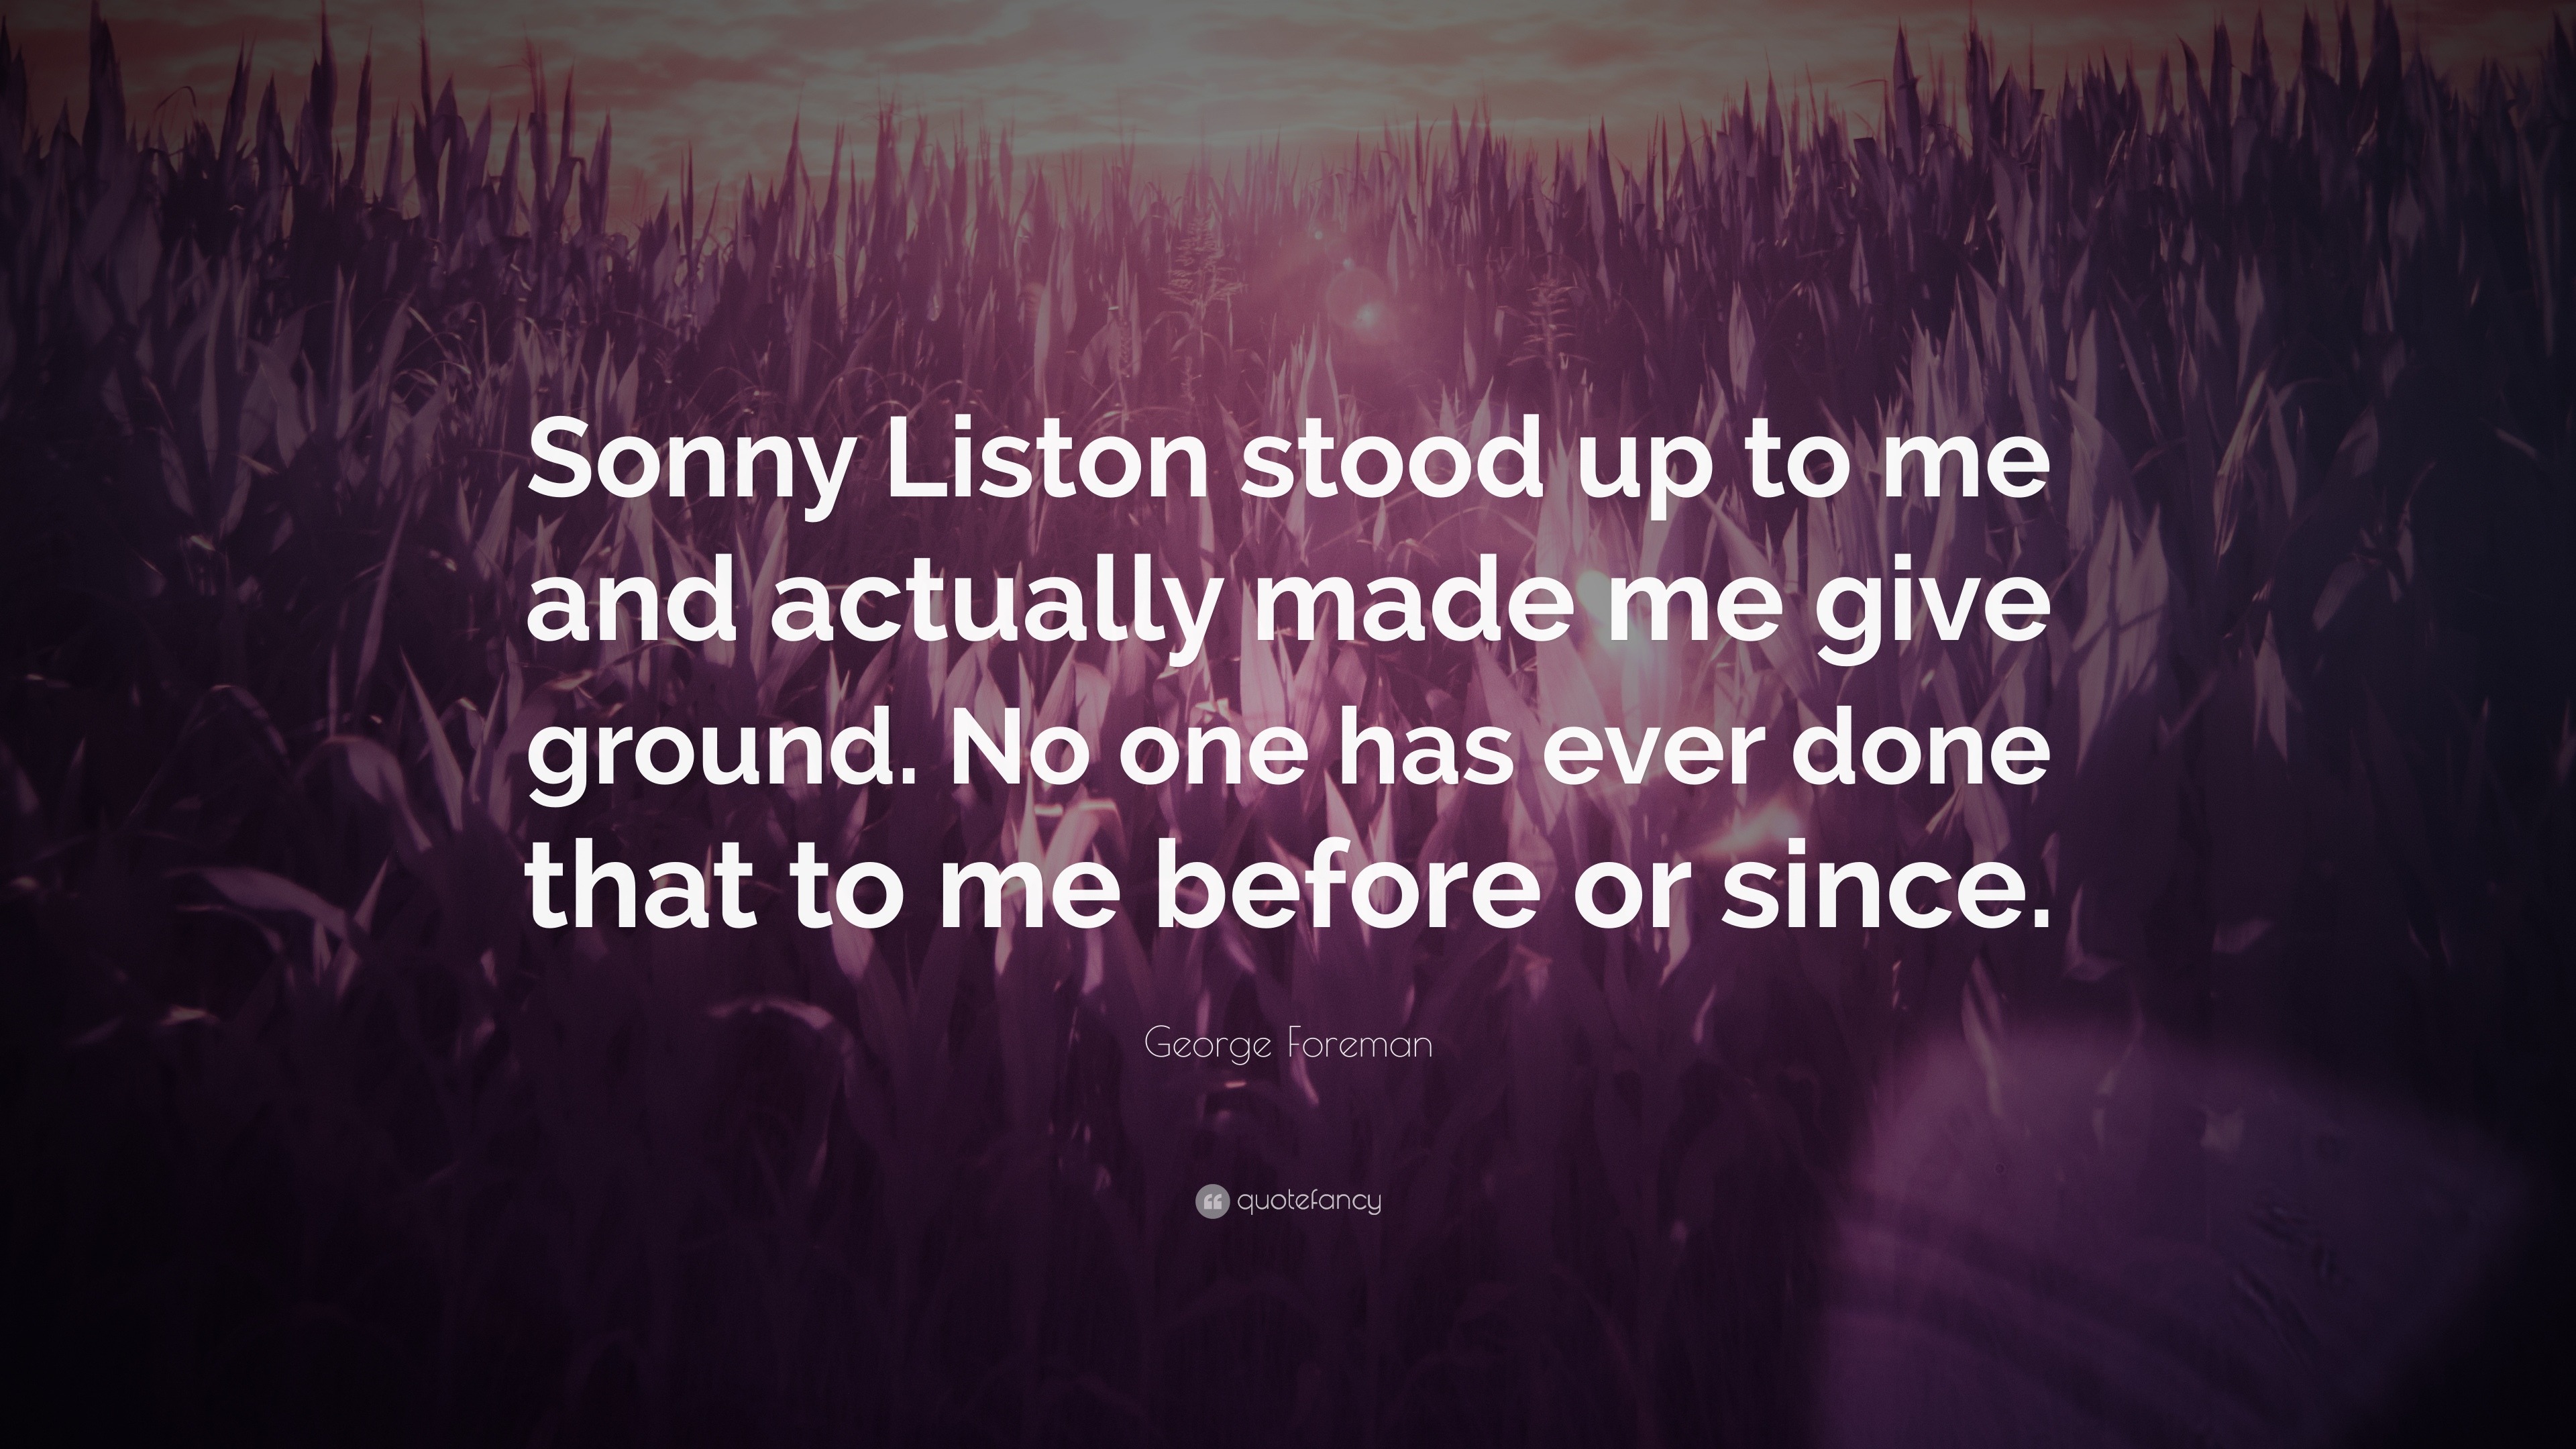 George Foreman Quote: “Sonny Liston stood up to me and actually made me ...